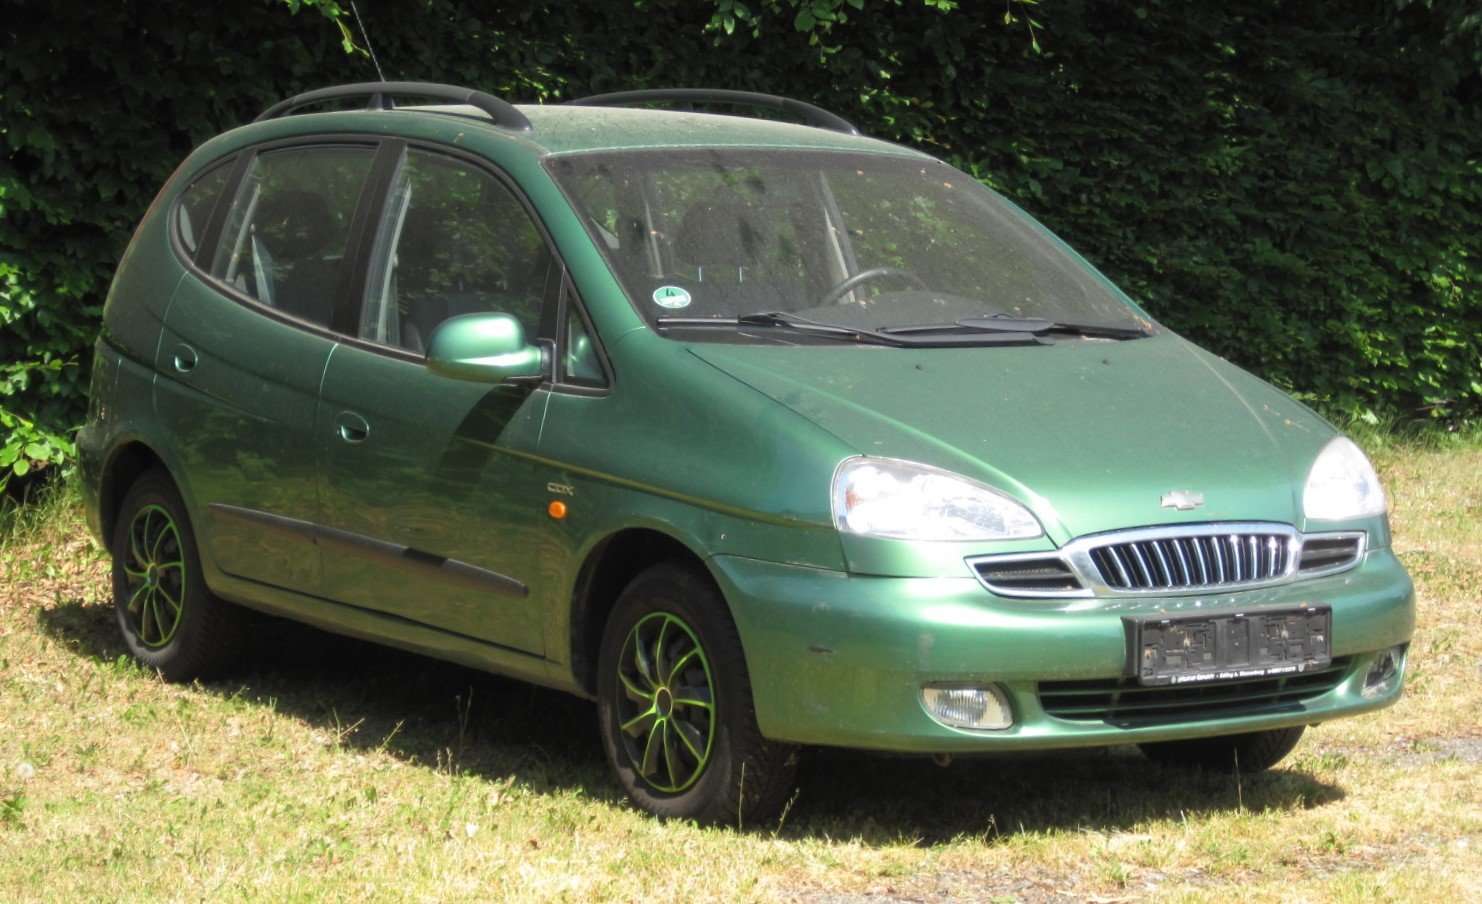 Daewoo Rezzo Station wagon in Green used in Reitmehring for € 599.-